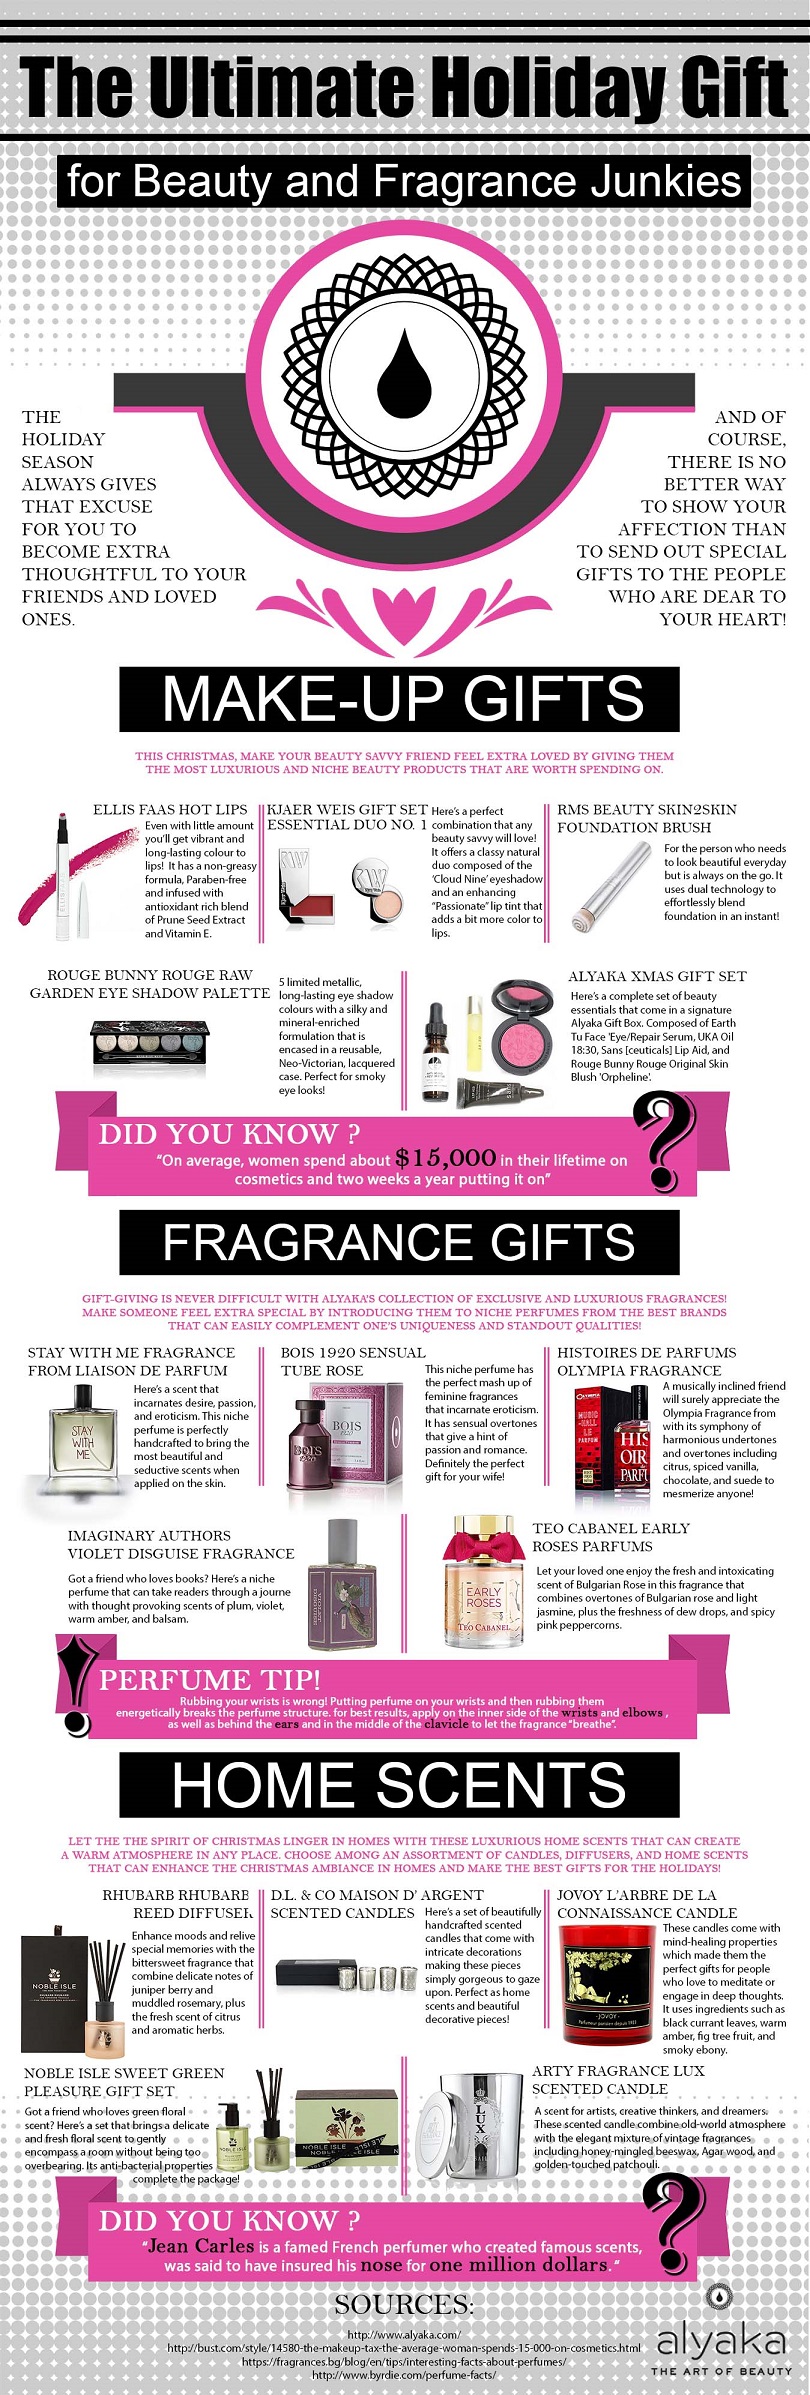 Ultimate Holiday Gift Guide for Beauty and Fragrance Junkies infographic